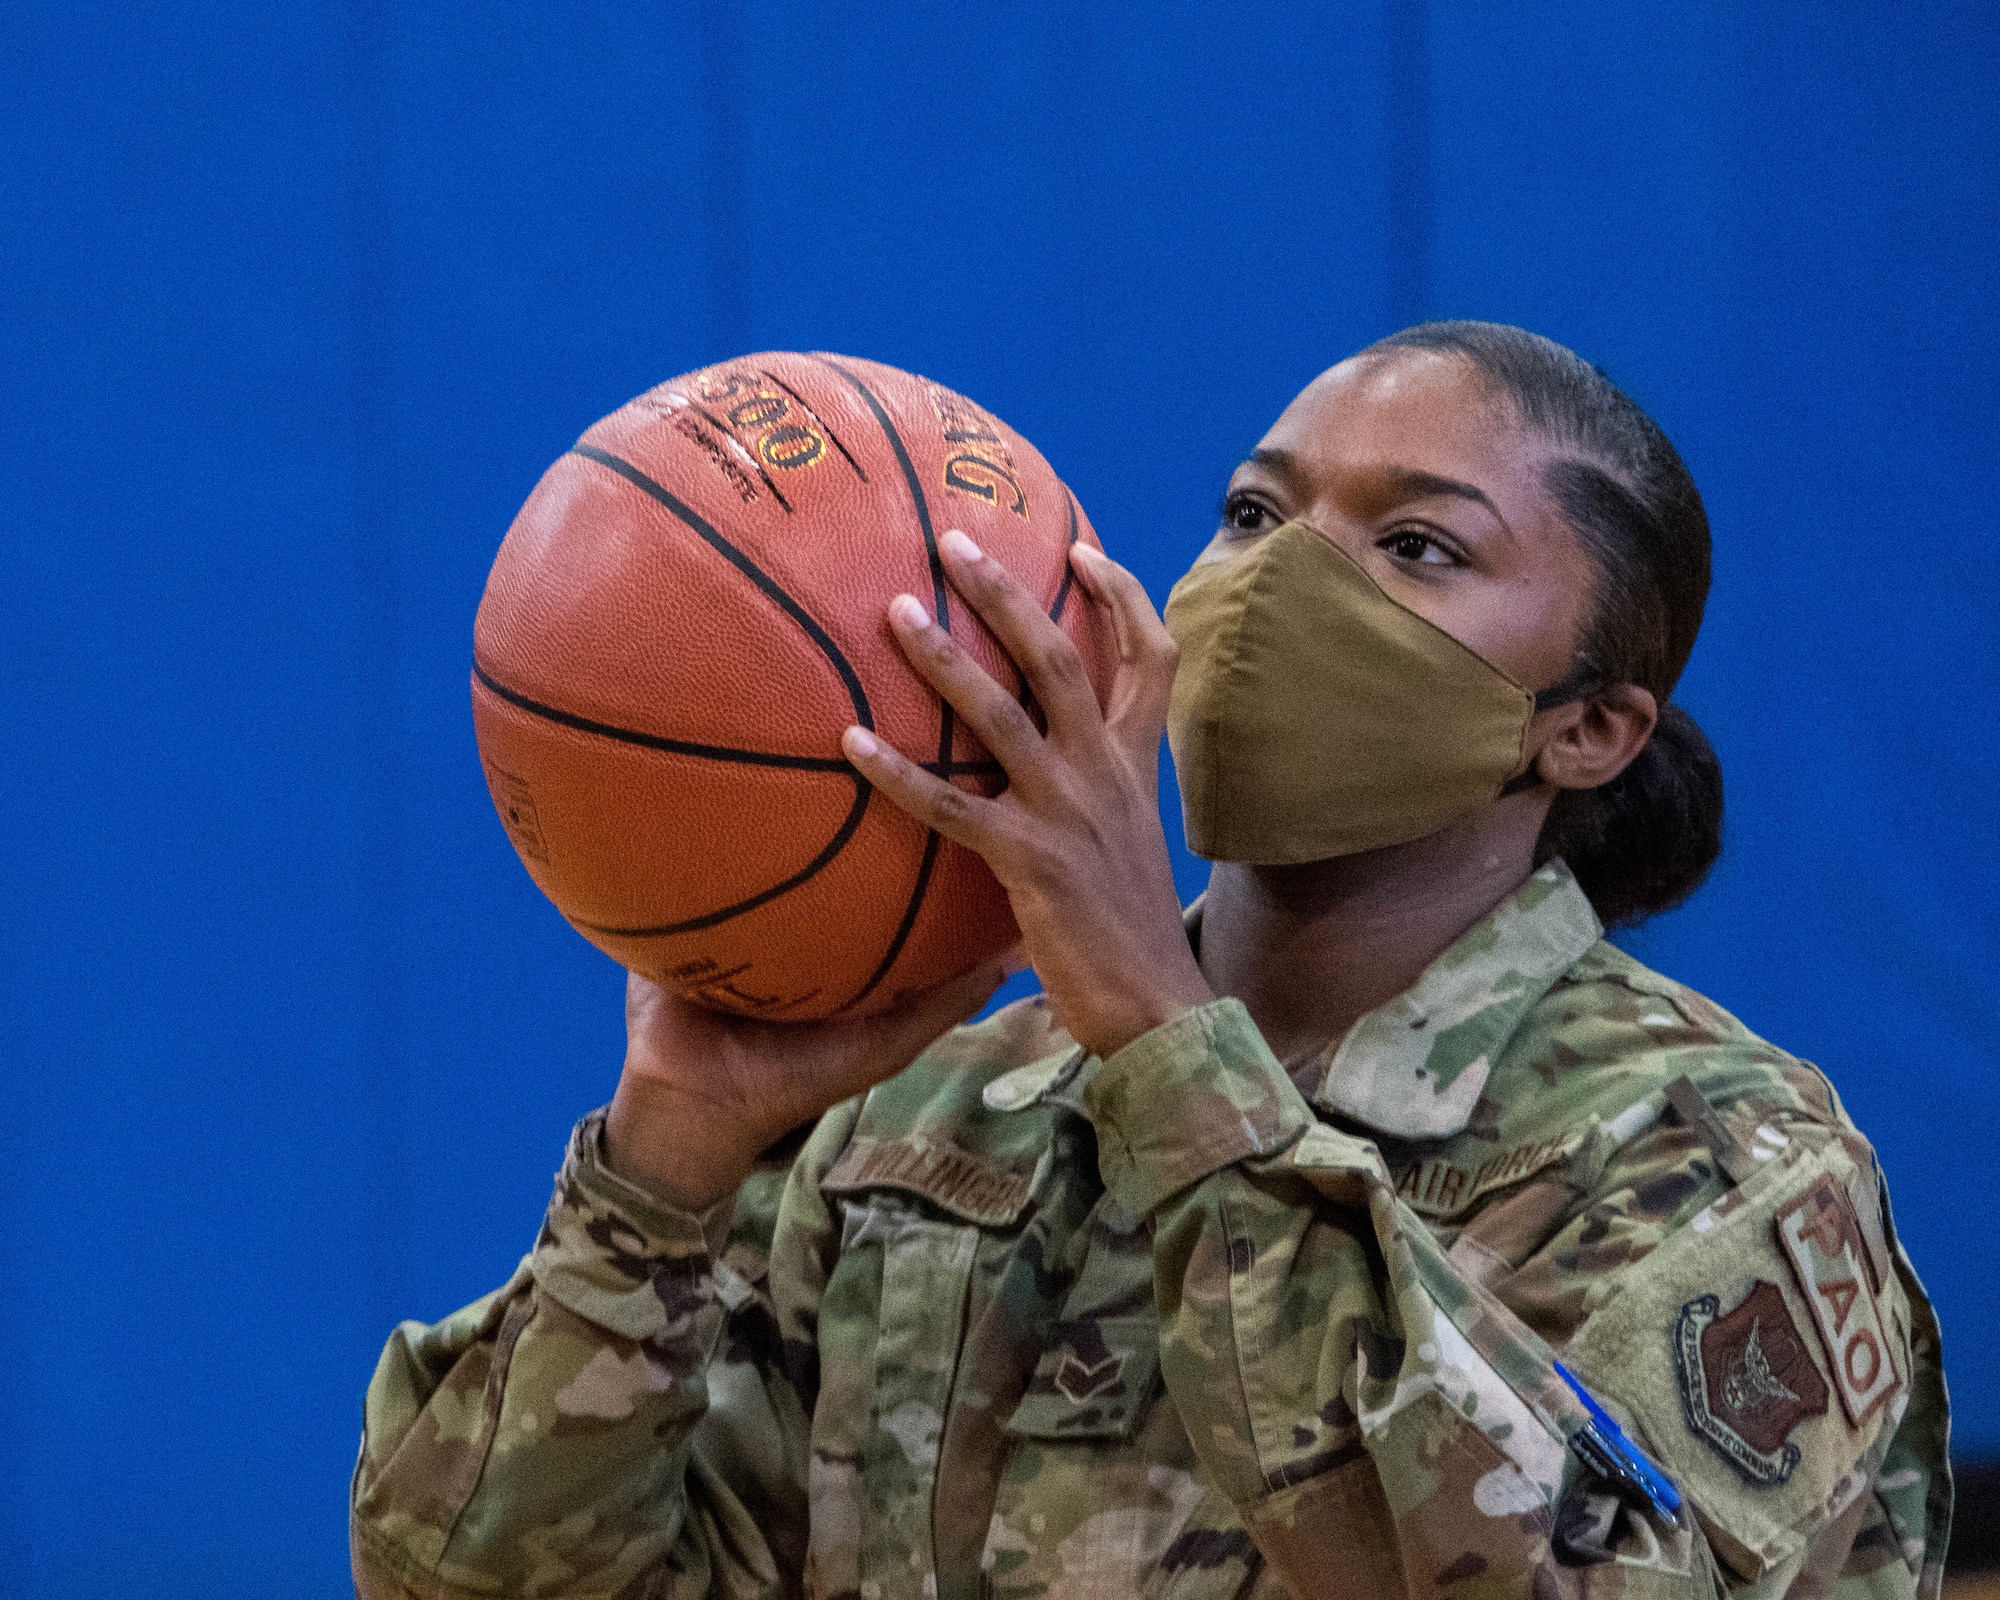 Senior Airman Kadesha Willingham, Non-Destructive Inspector for the 94th Maintenance Squadron, participates in the free throw contest held at the fitness center, May 1 at Dobbins Air Reserve Base, Ga. The 94th Force Support Squadron held a three-point and free throw contest to commemorate the reopening of the fitness center that spanned from April 30 to May 1. (U.S. Air Force photo/Staff Sgt. Josh Kincaid)